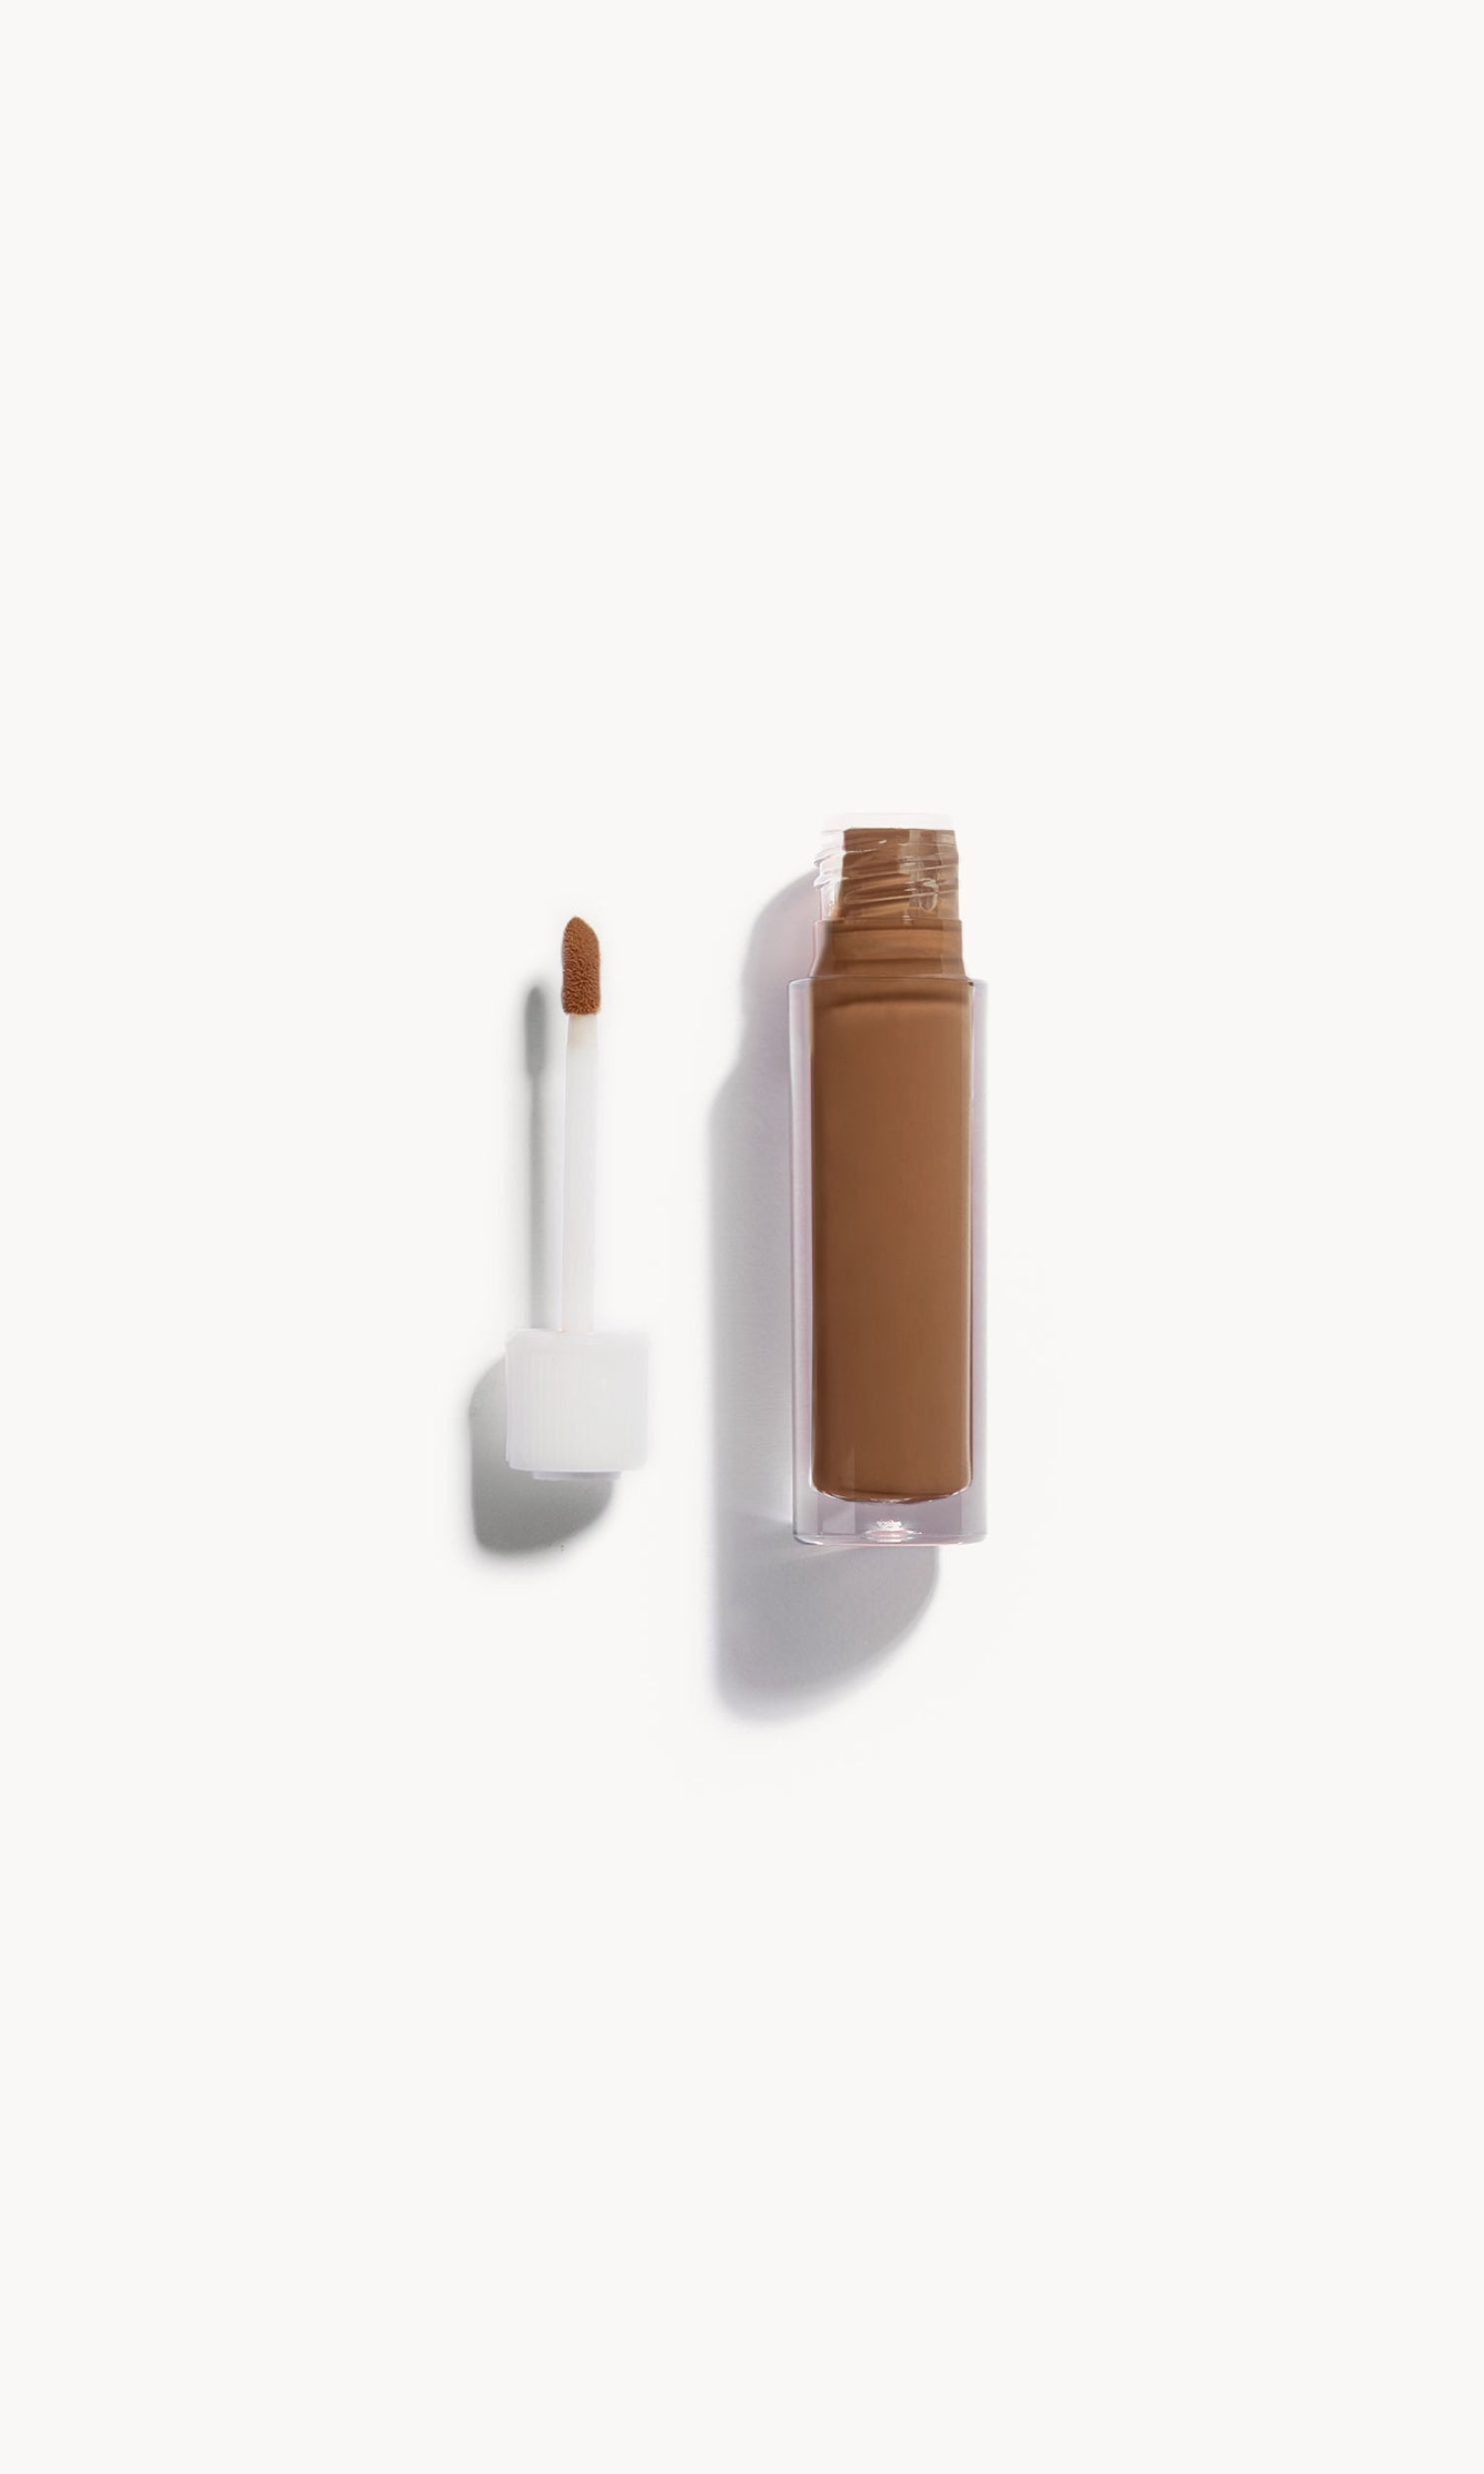 an open bottle of concealer on its side next to a white refill wand